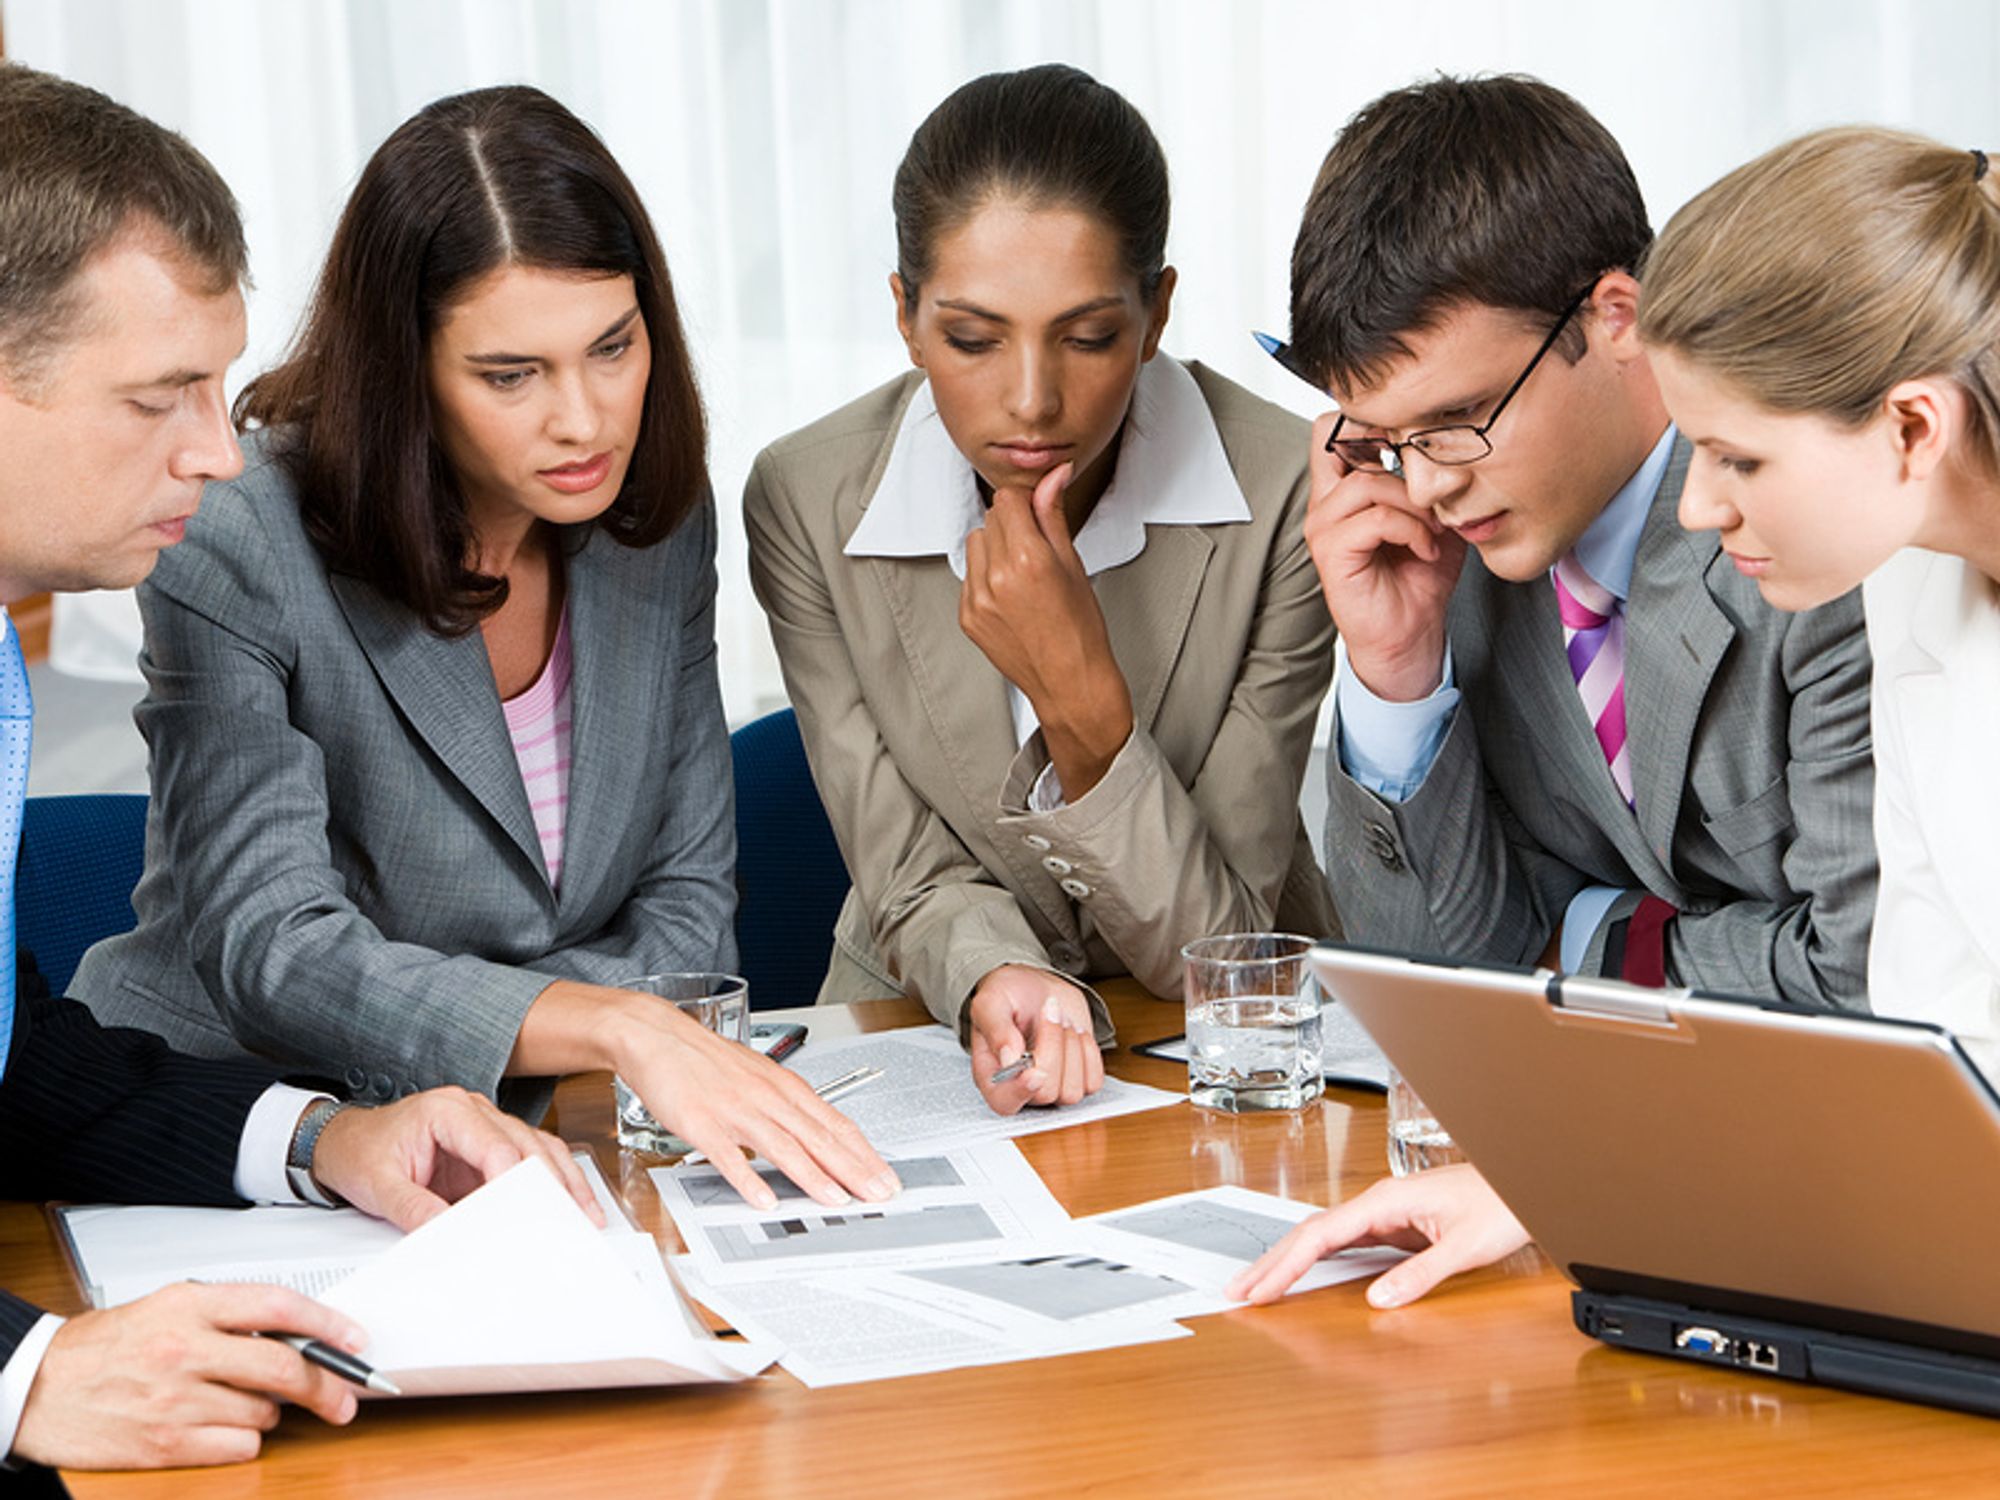 Concerned co-workers gather to discuss mistakes being made in the company's employer branding strategies.